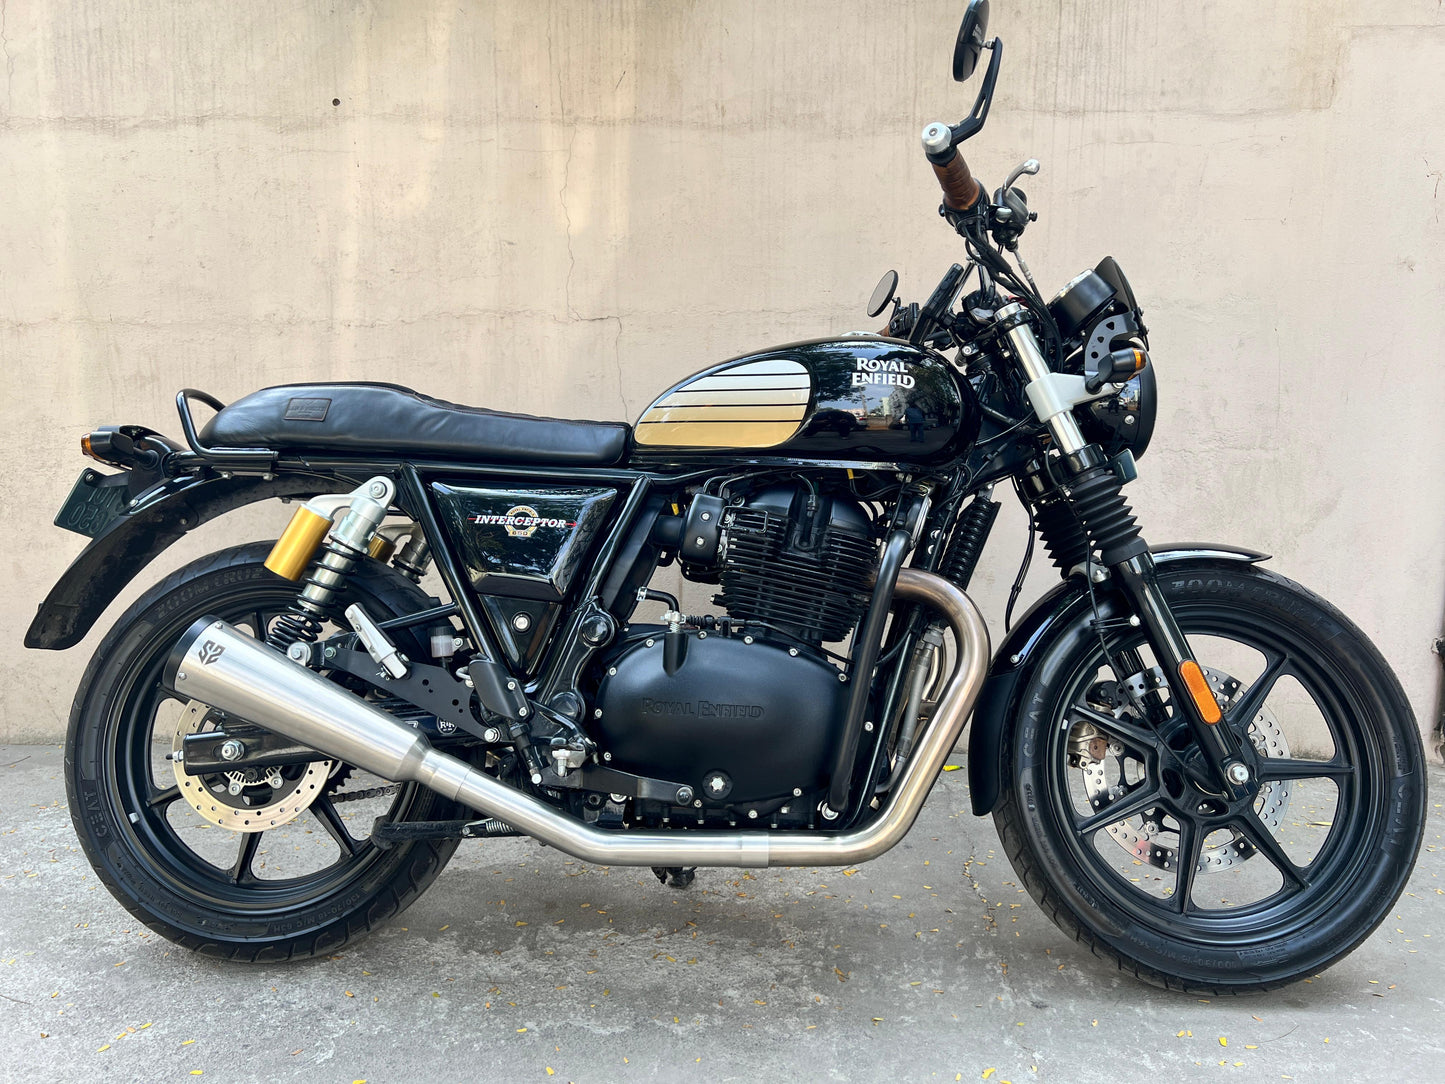 2x2 Full System Exhaust with FAT CANS  for Royal Enfield Interceptor/Continental GT